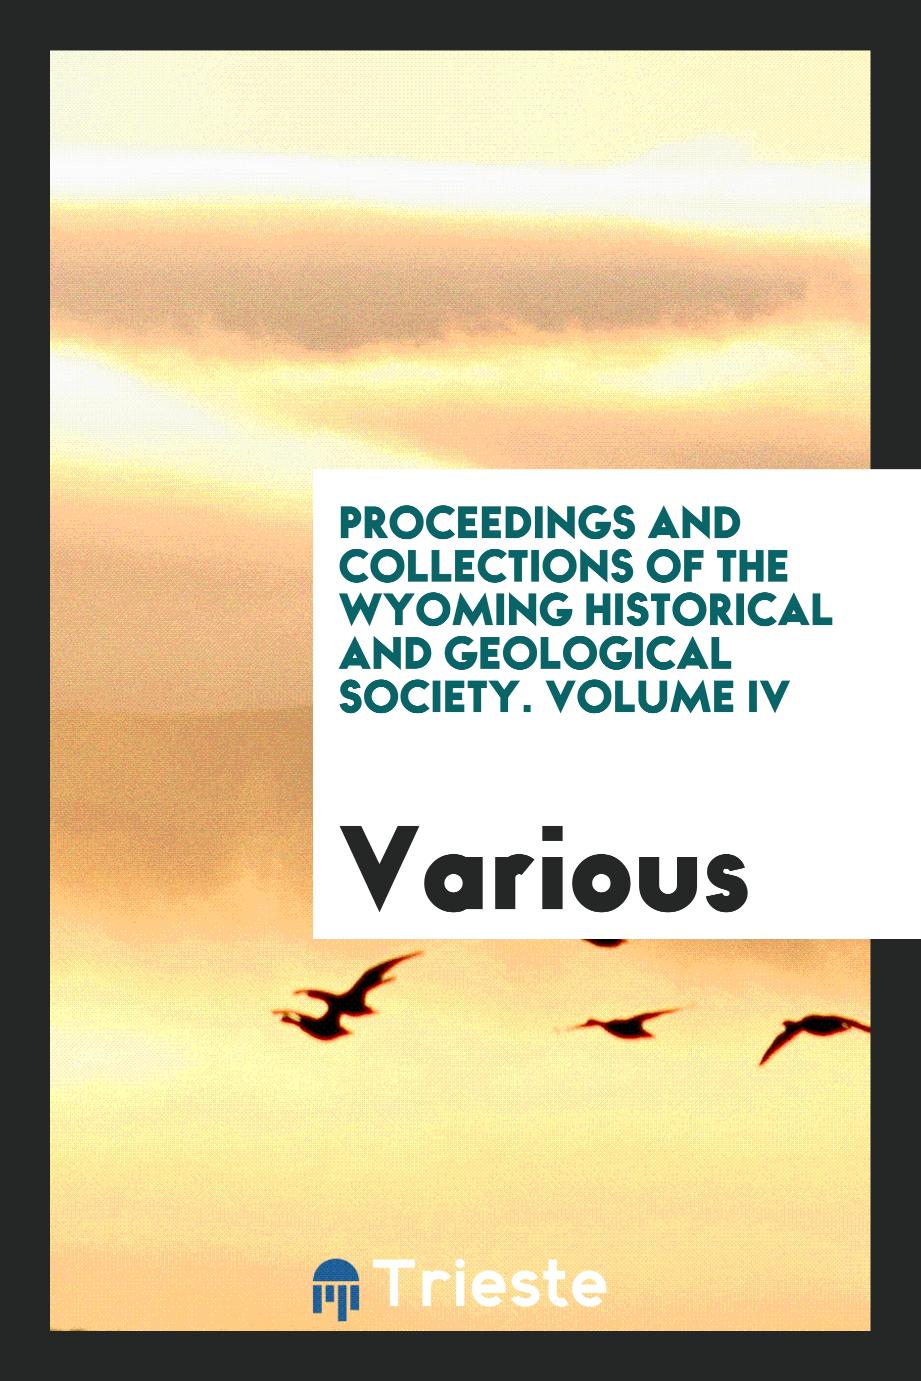 Proceedings and collections of the wyoming historical and geological society. Volume IV